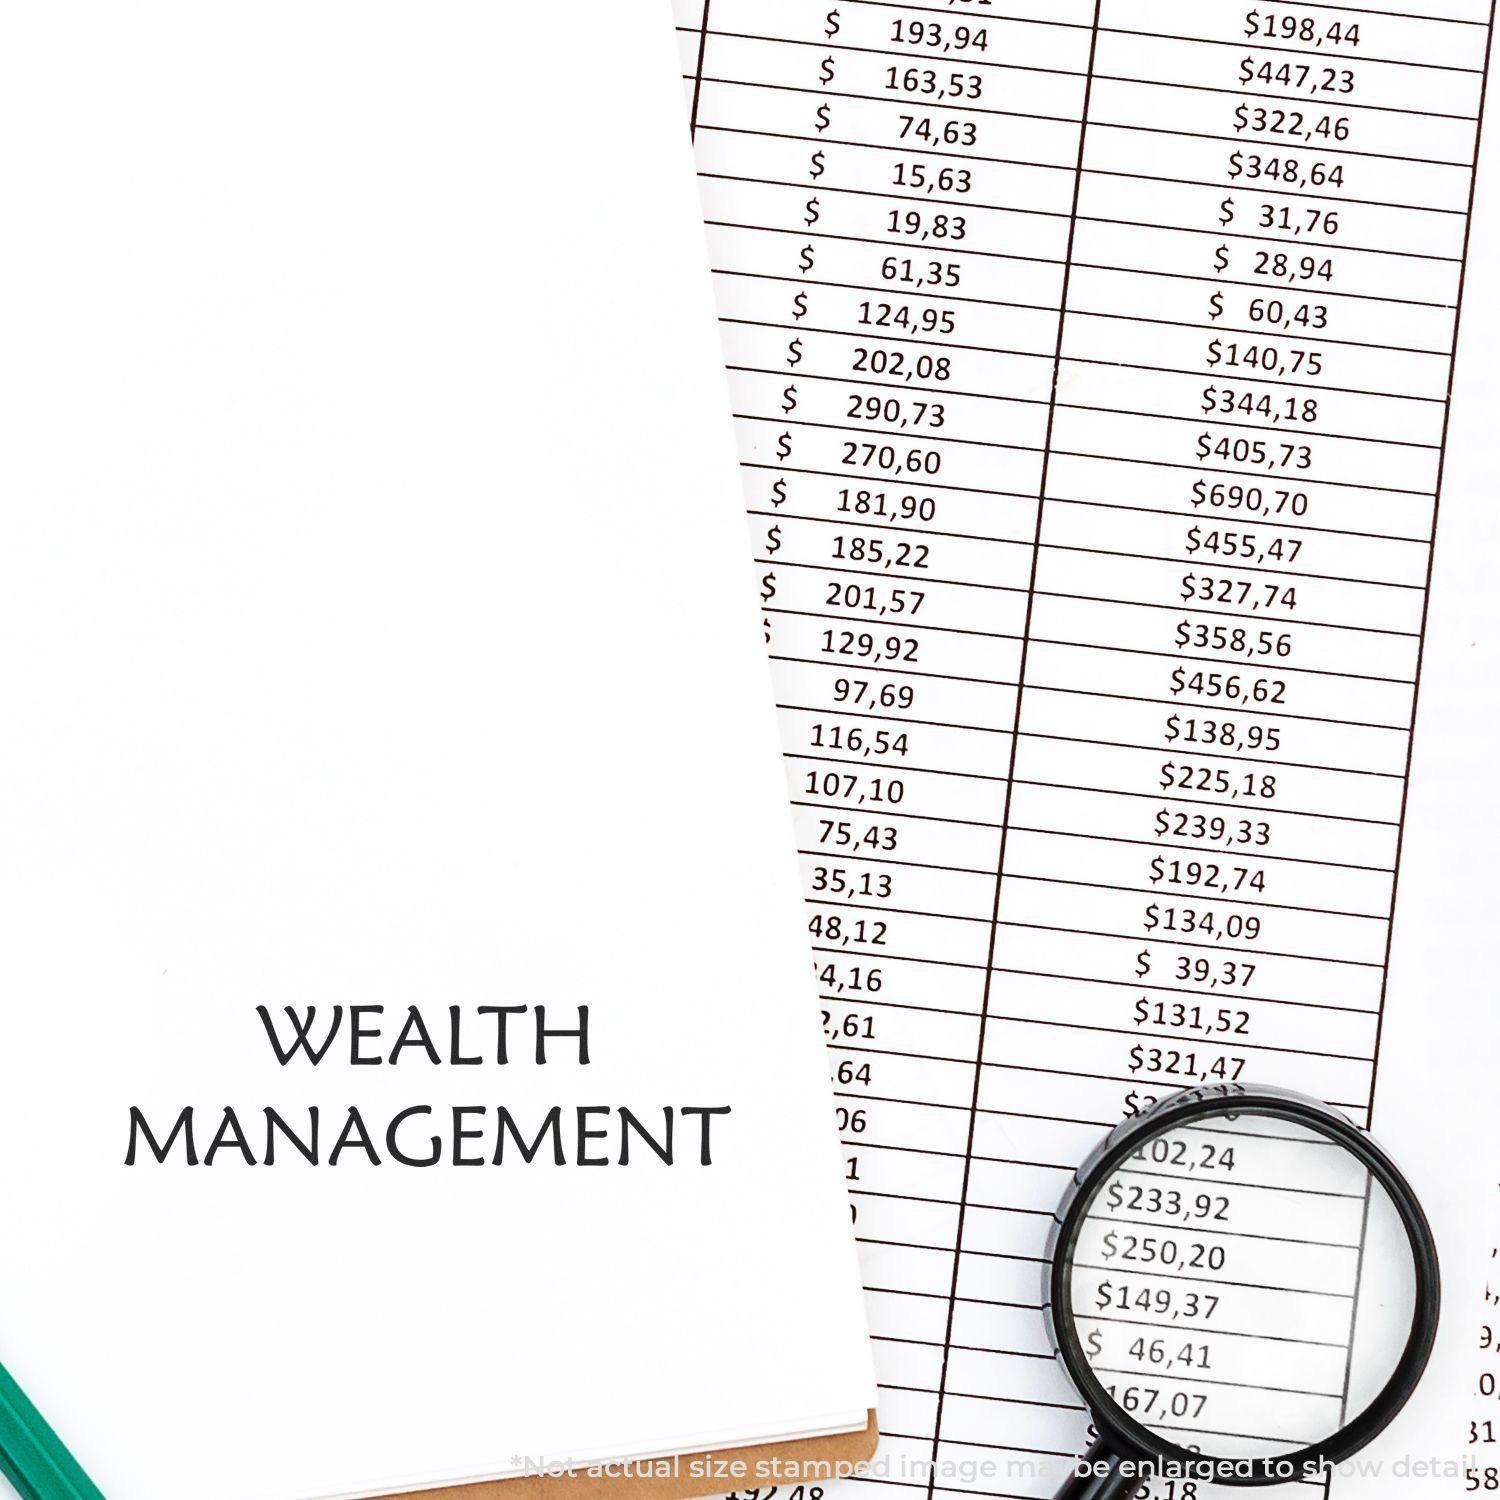 A self-inking stamp with a stamped image showing how the text "WEALTH MANAGEMENT" in a large bold font is displayed by it.